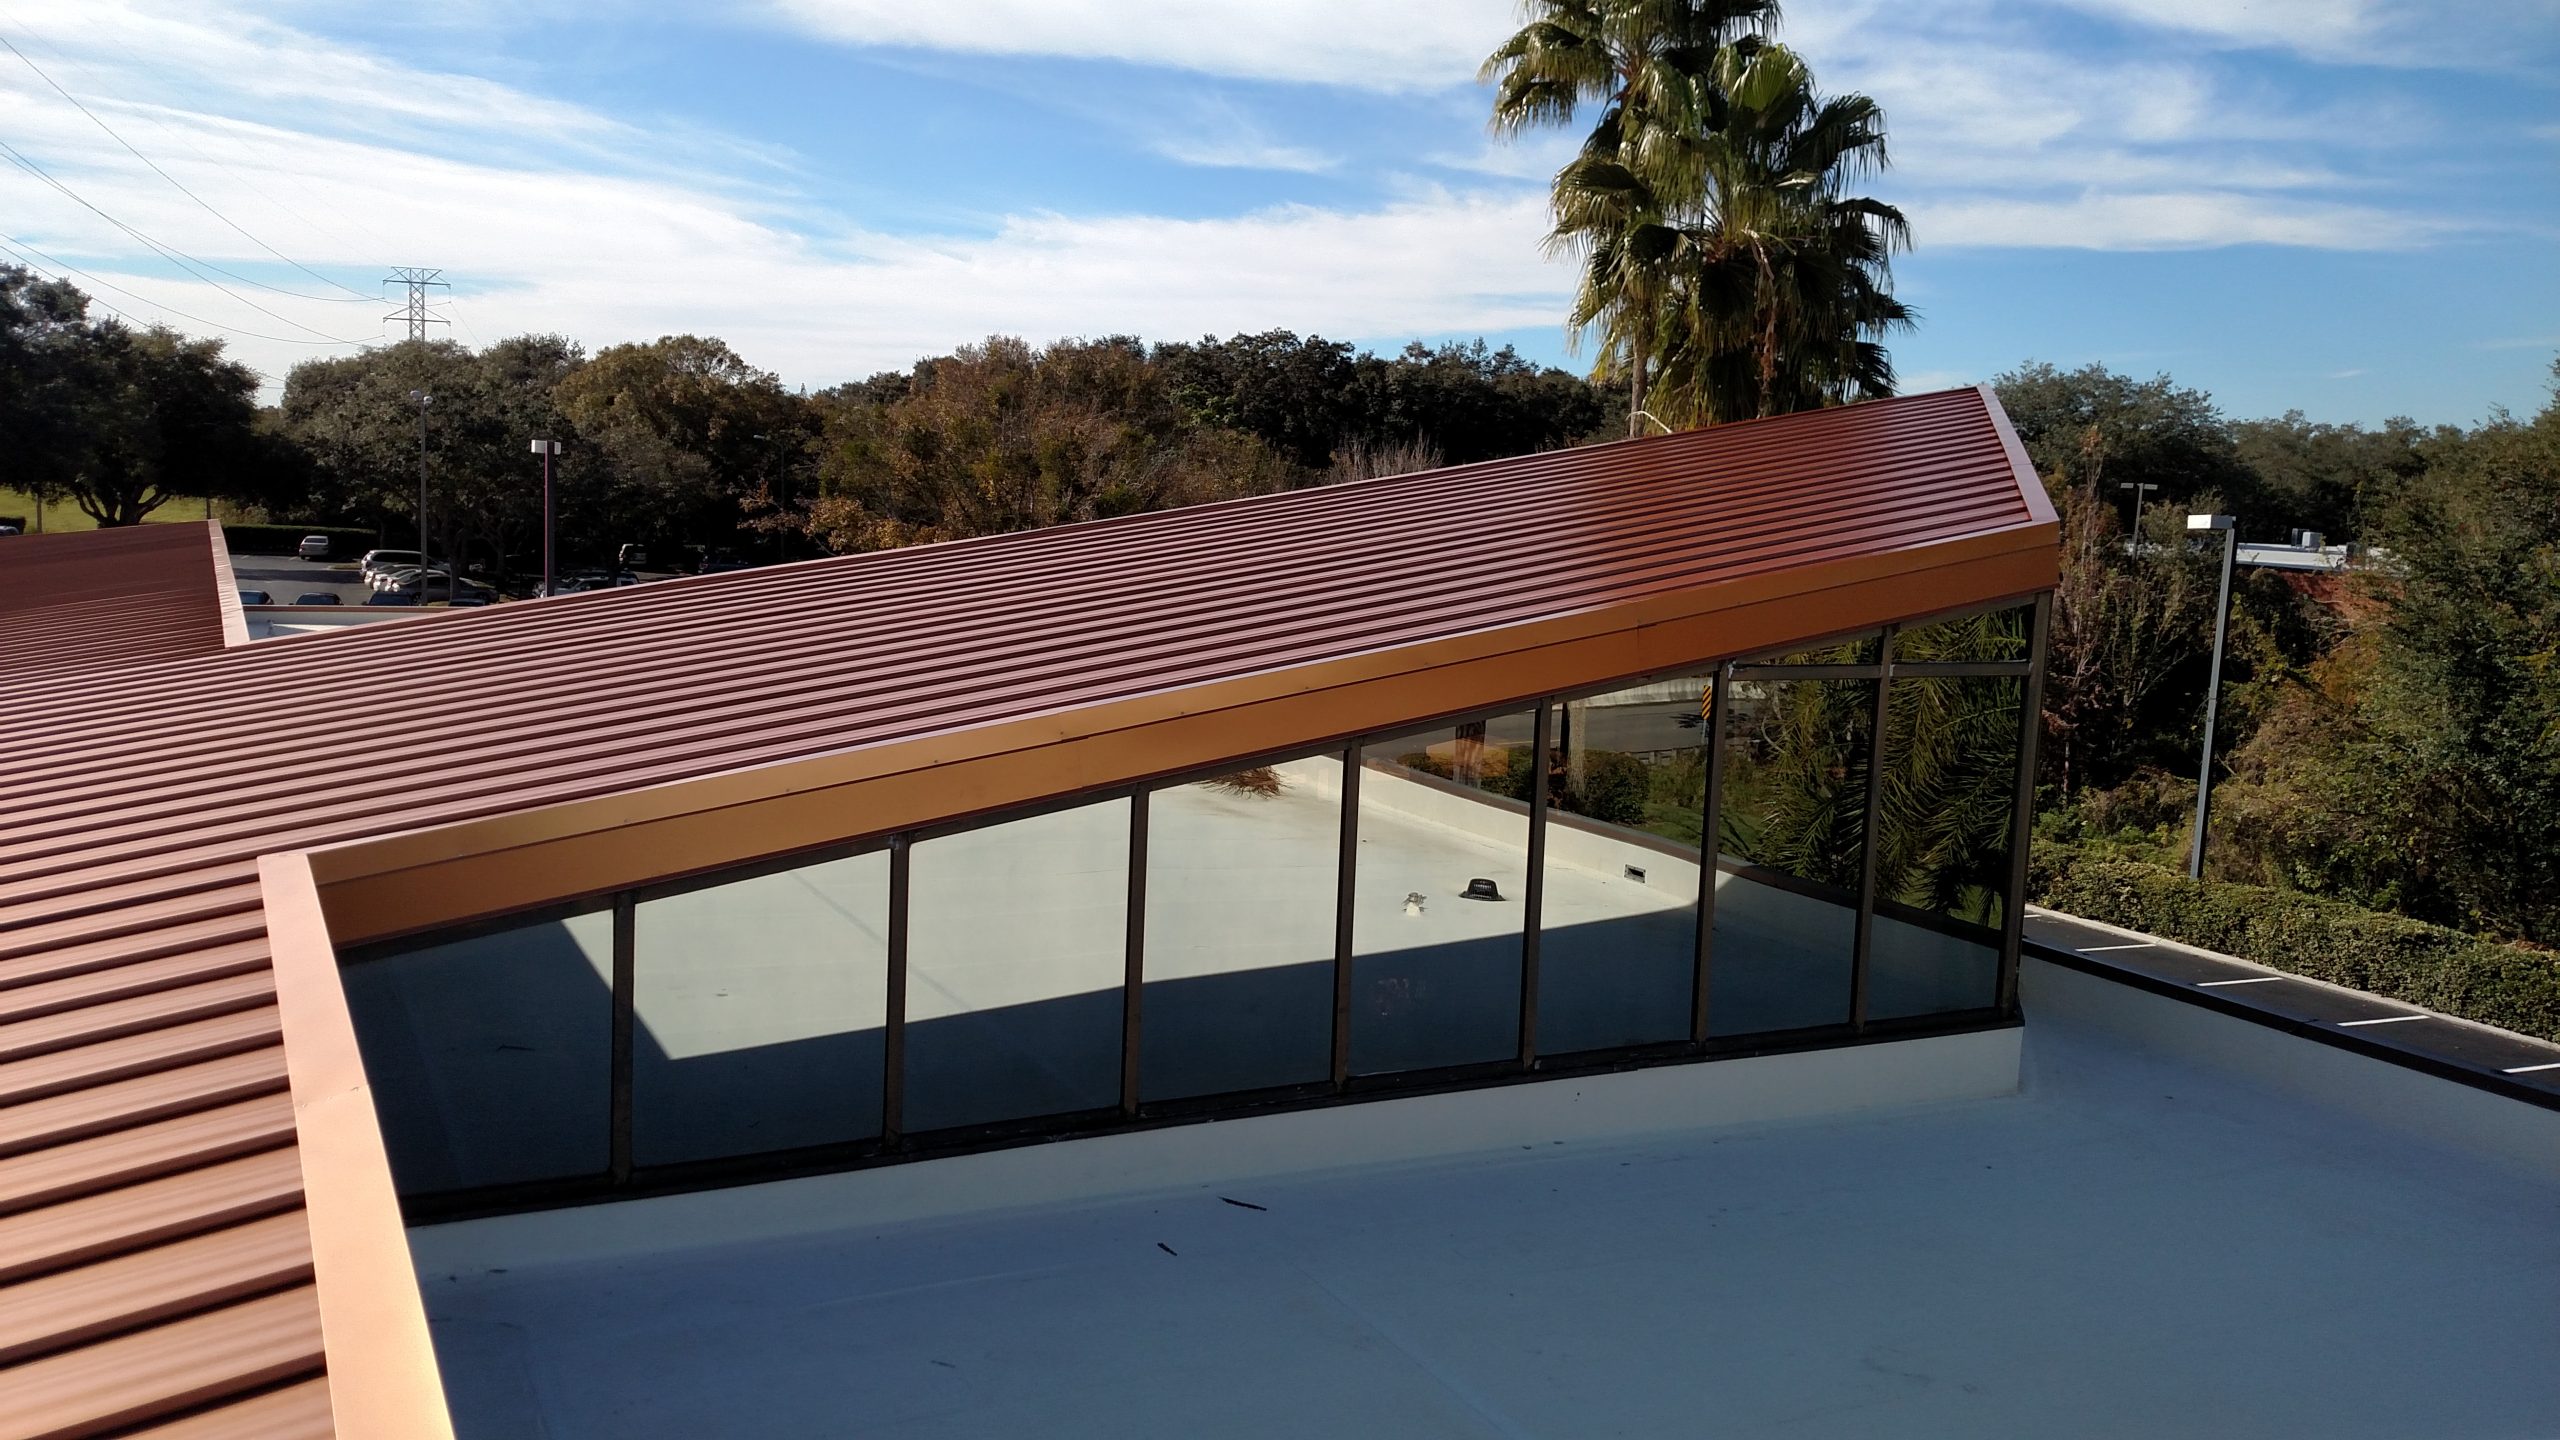 Copper Penny Standing Seam Roof On Church